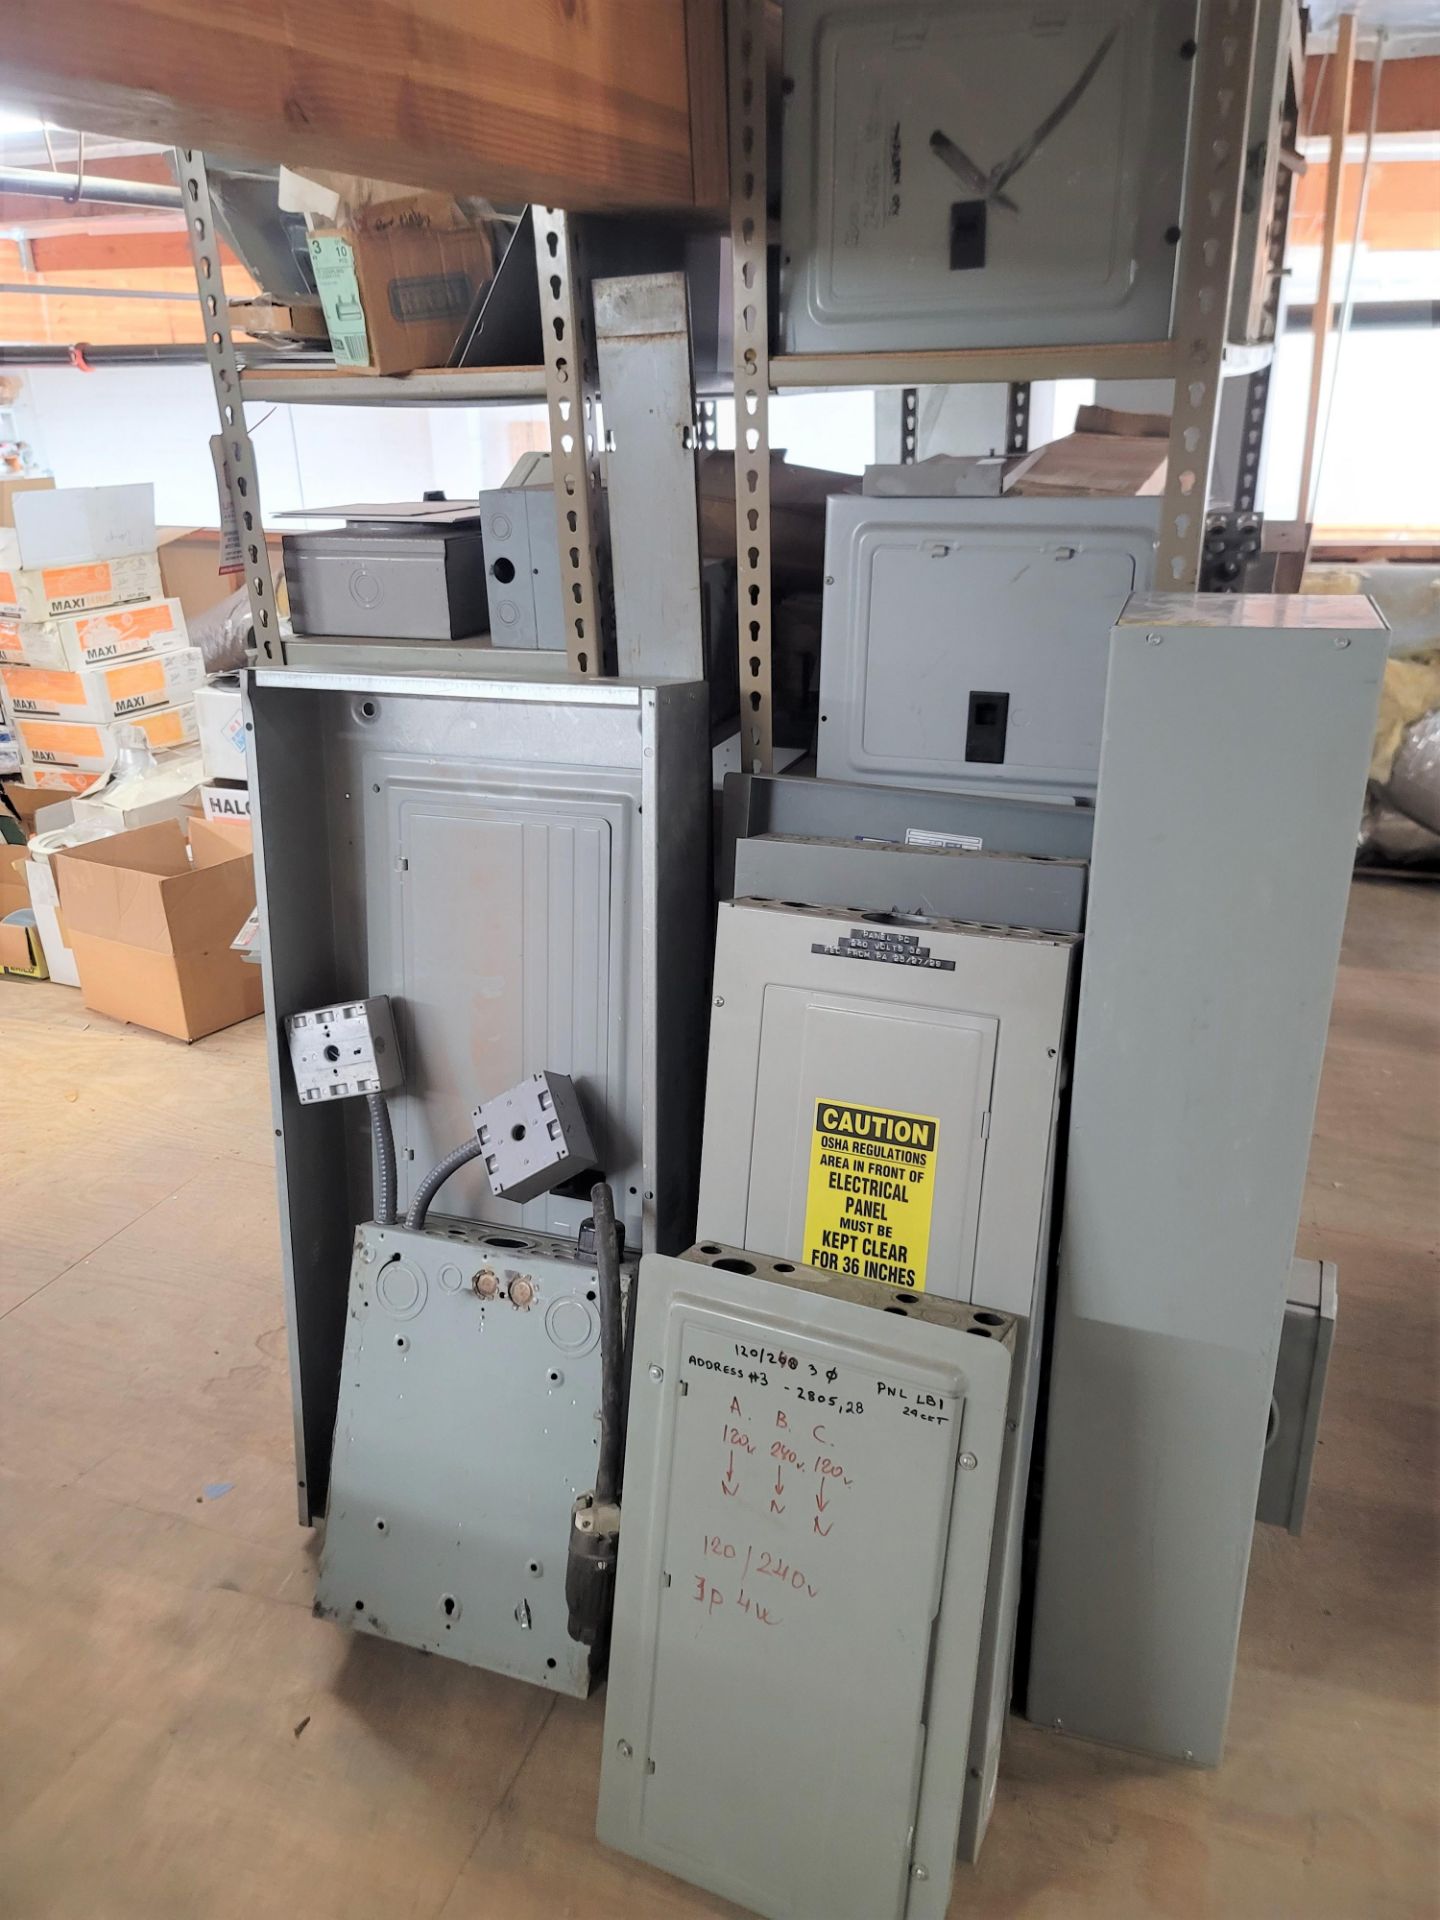 LOT - ALL USED PANEL BOXES, BREAKER HARDWARE, SAFETY SWITCHES, ETC. - Image 2 of 3